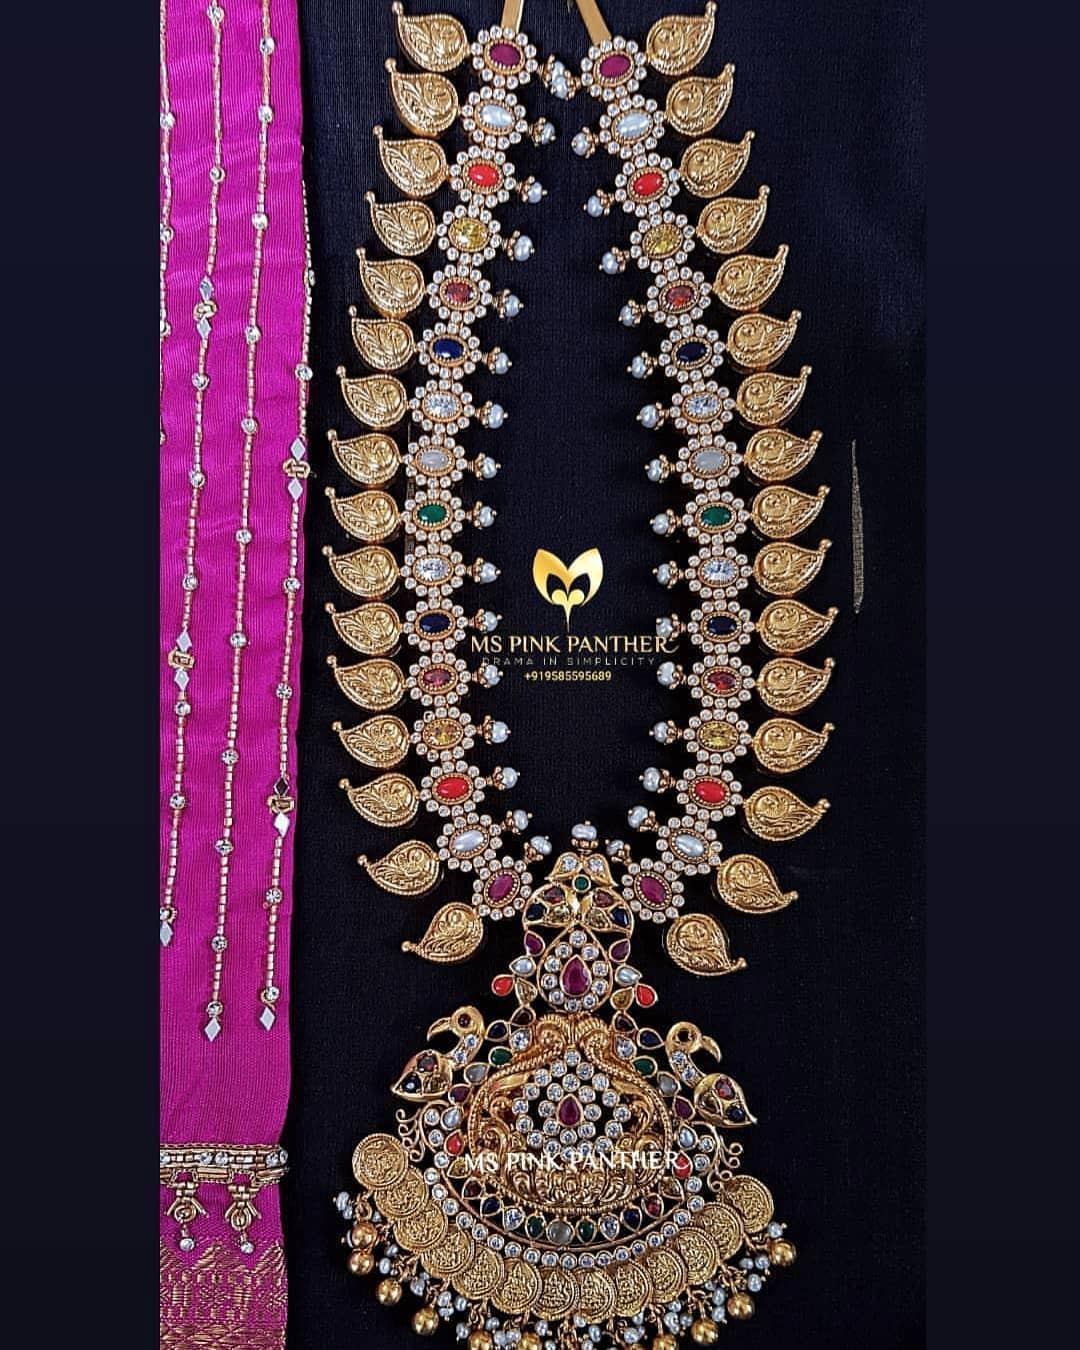 south-india-temple-necklace-designs-11